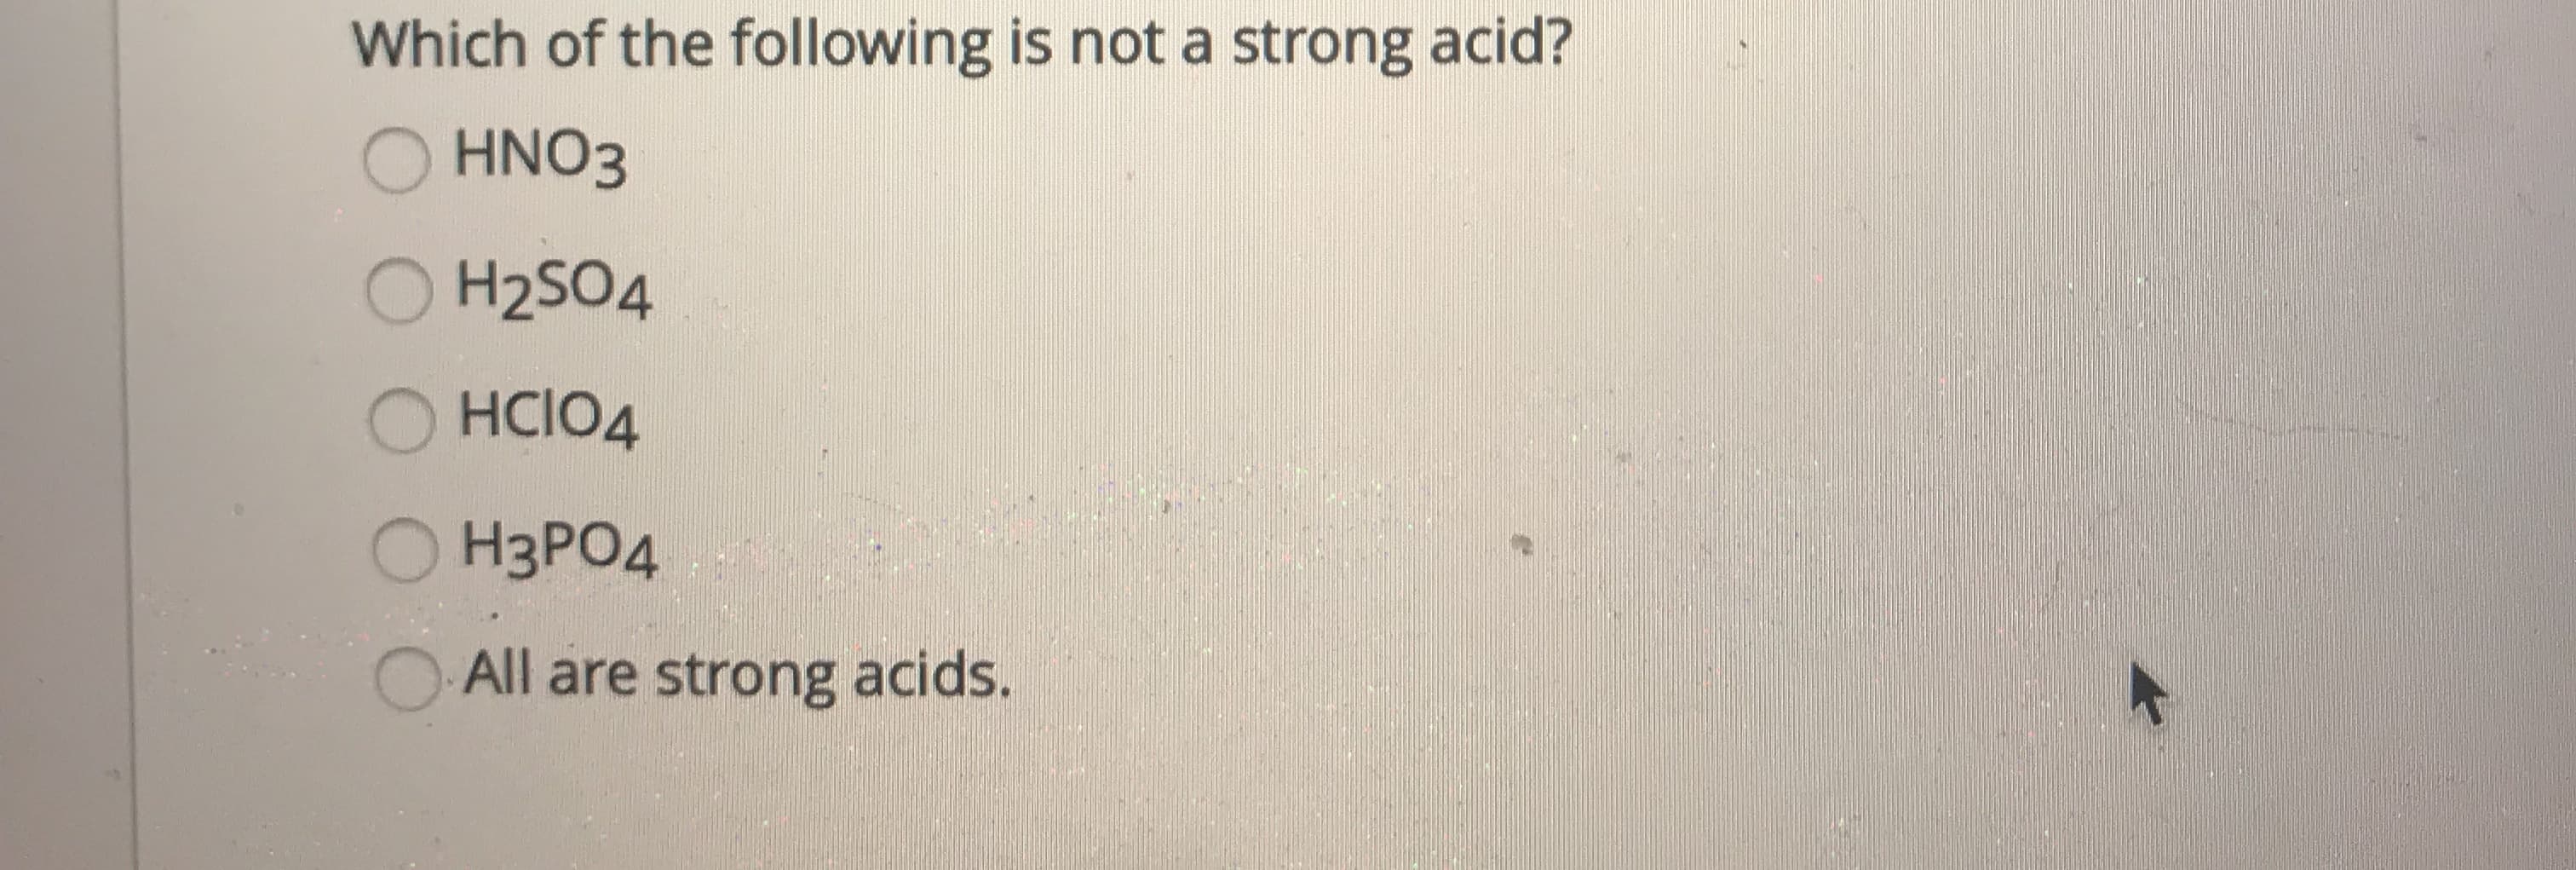 Which of the following is not a strong acid?
O HNO3
O H2S04
O HCIO4
O H3PO4
OAll are strong acids.
